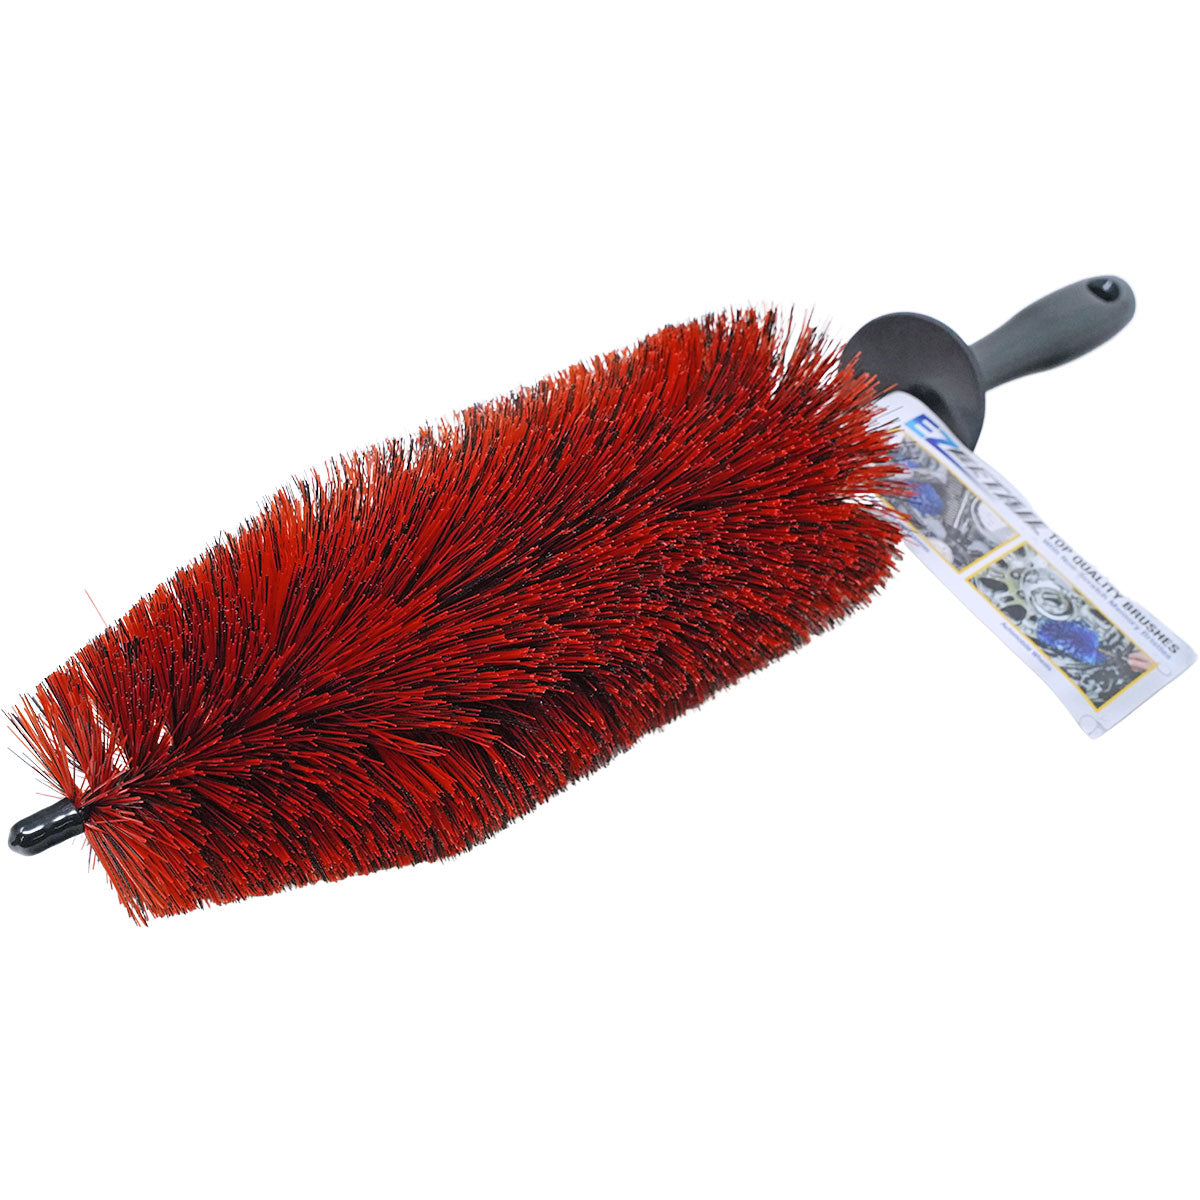  Detail King Woolie Wheel Brush - 18” Red Handle - Safest & Most  Effective Brush to Clean Automotive Wheels - Professional Brush : Automotive